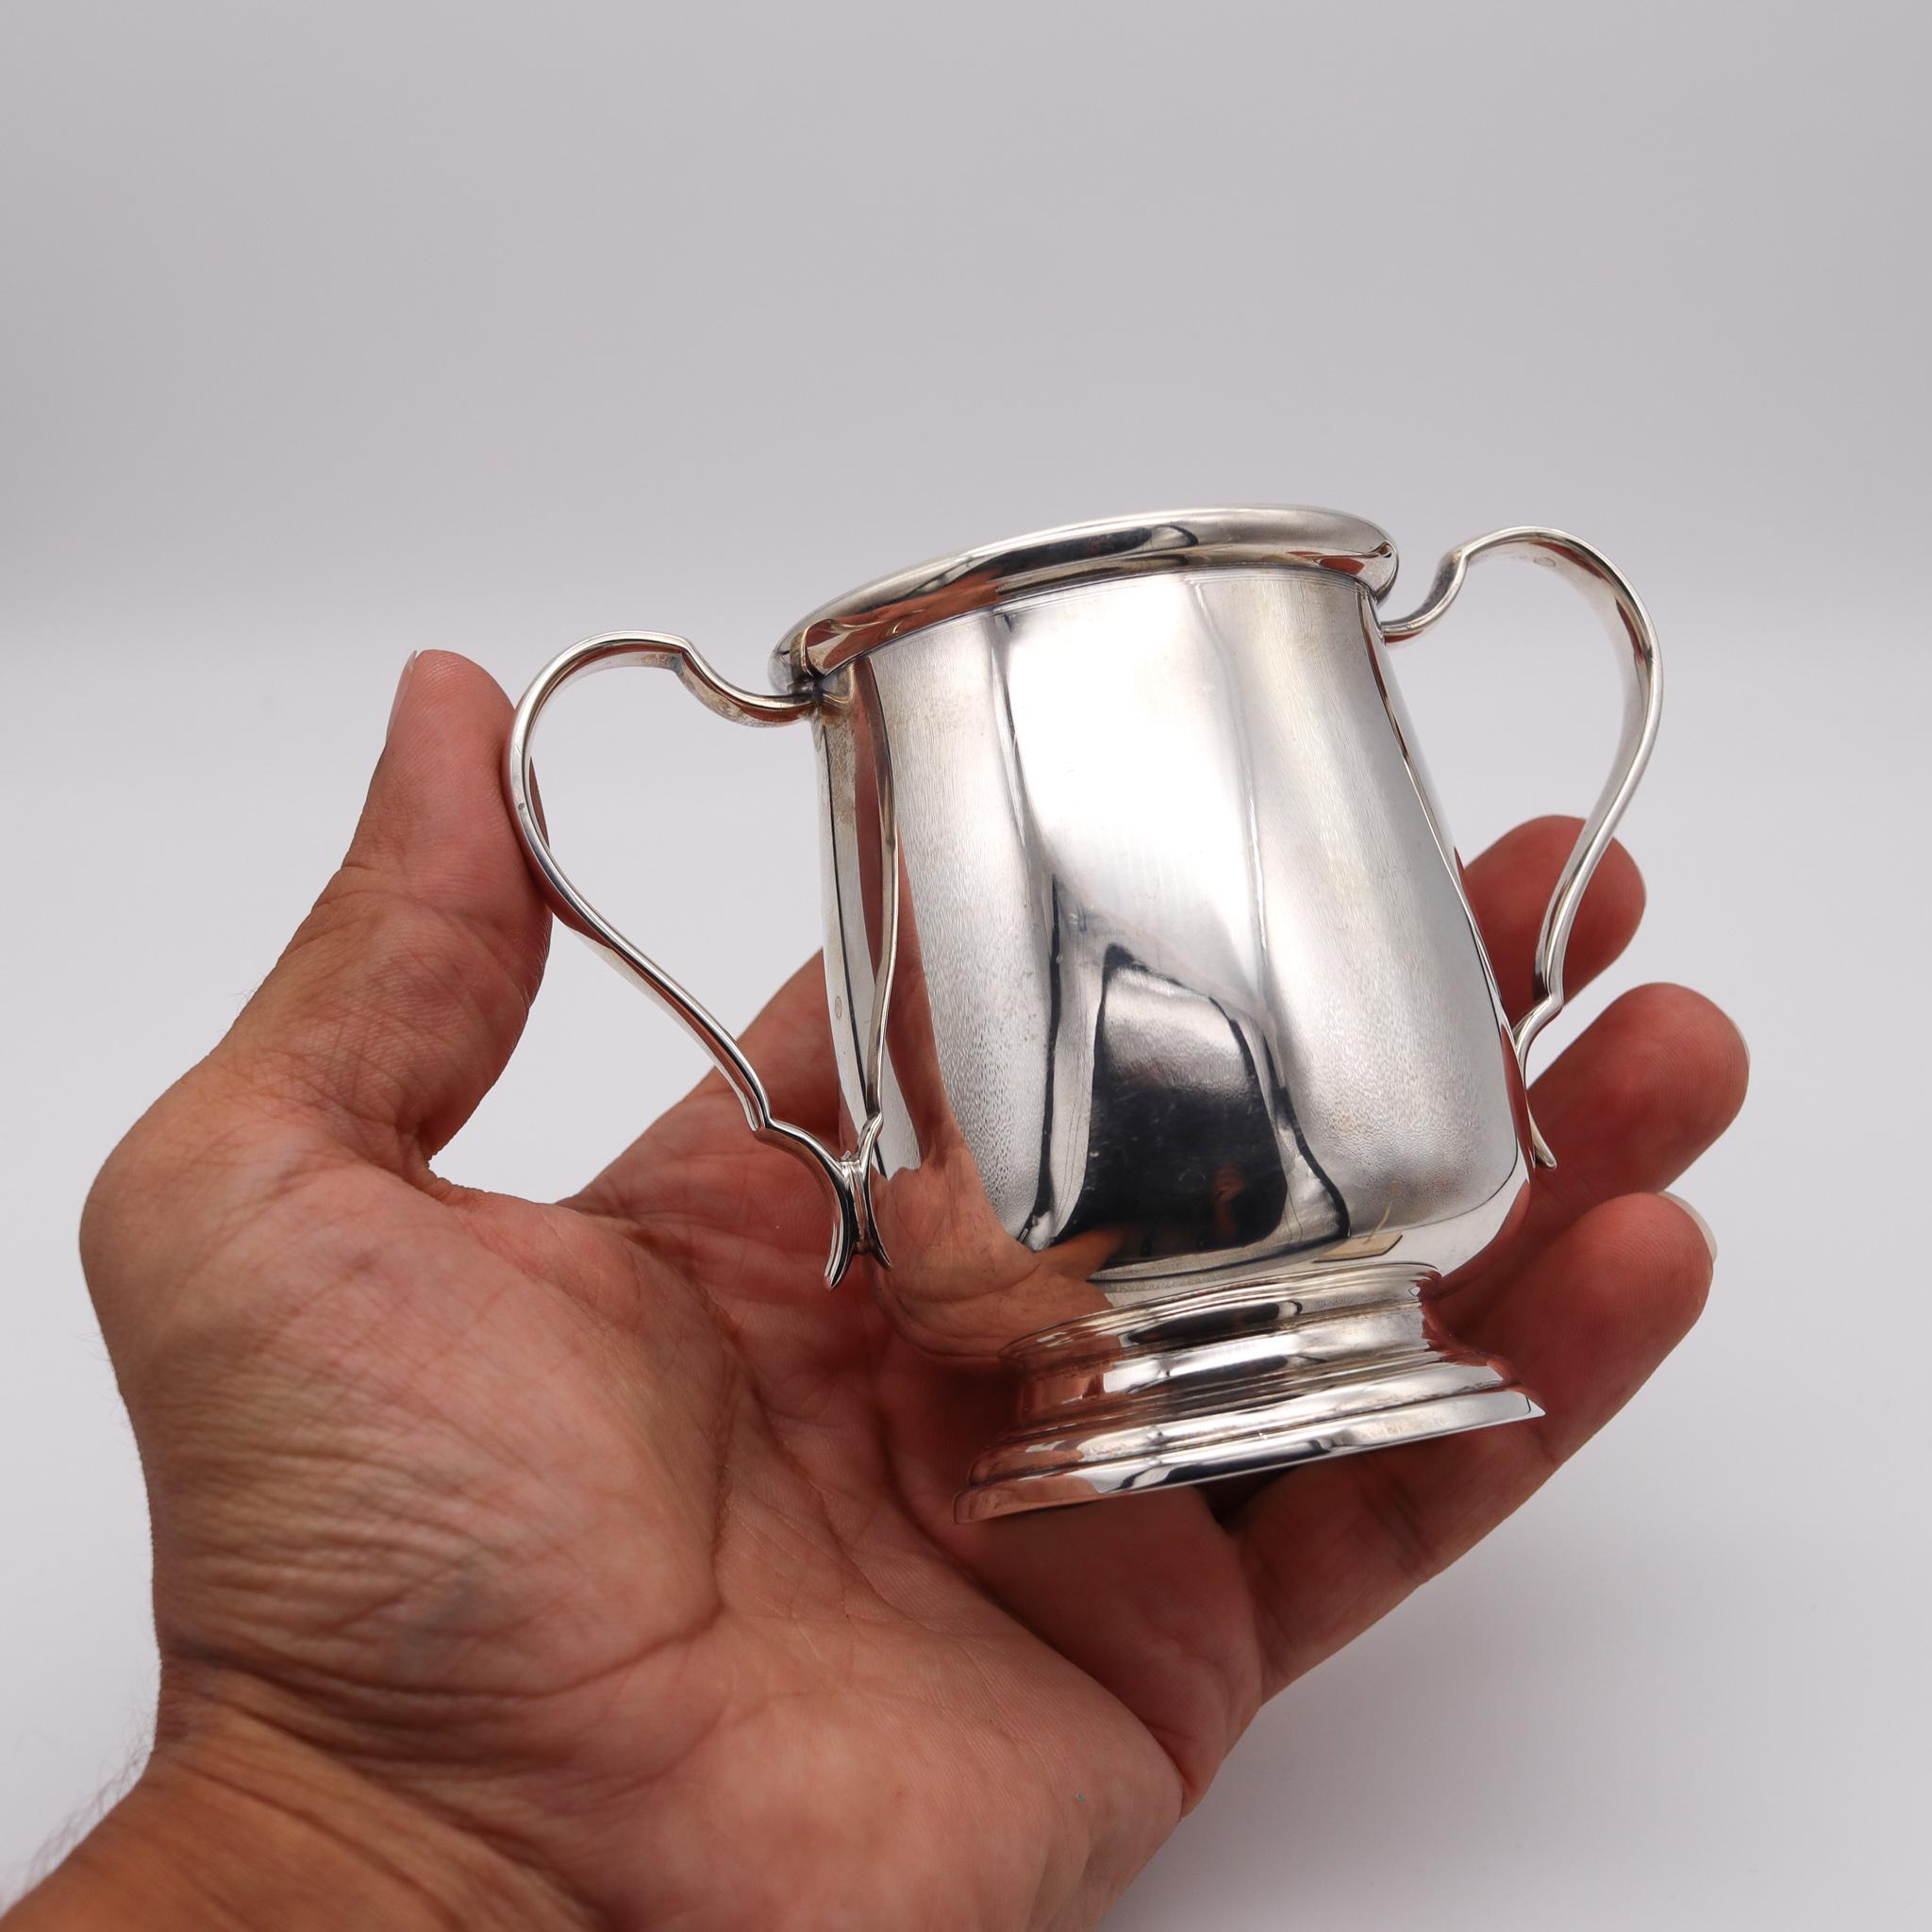 A sterling silver cup designed by Buccellati.

Vintage double handles cup, created in Milan Italy by the house of Buccellati. This beautiful piece has been crafted with classical patterns in solid .925/.999 sterling silver with very high polished